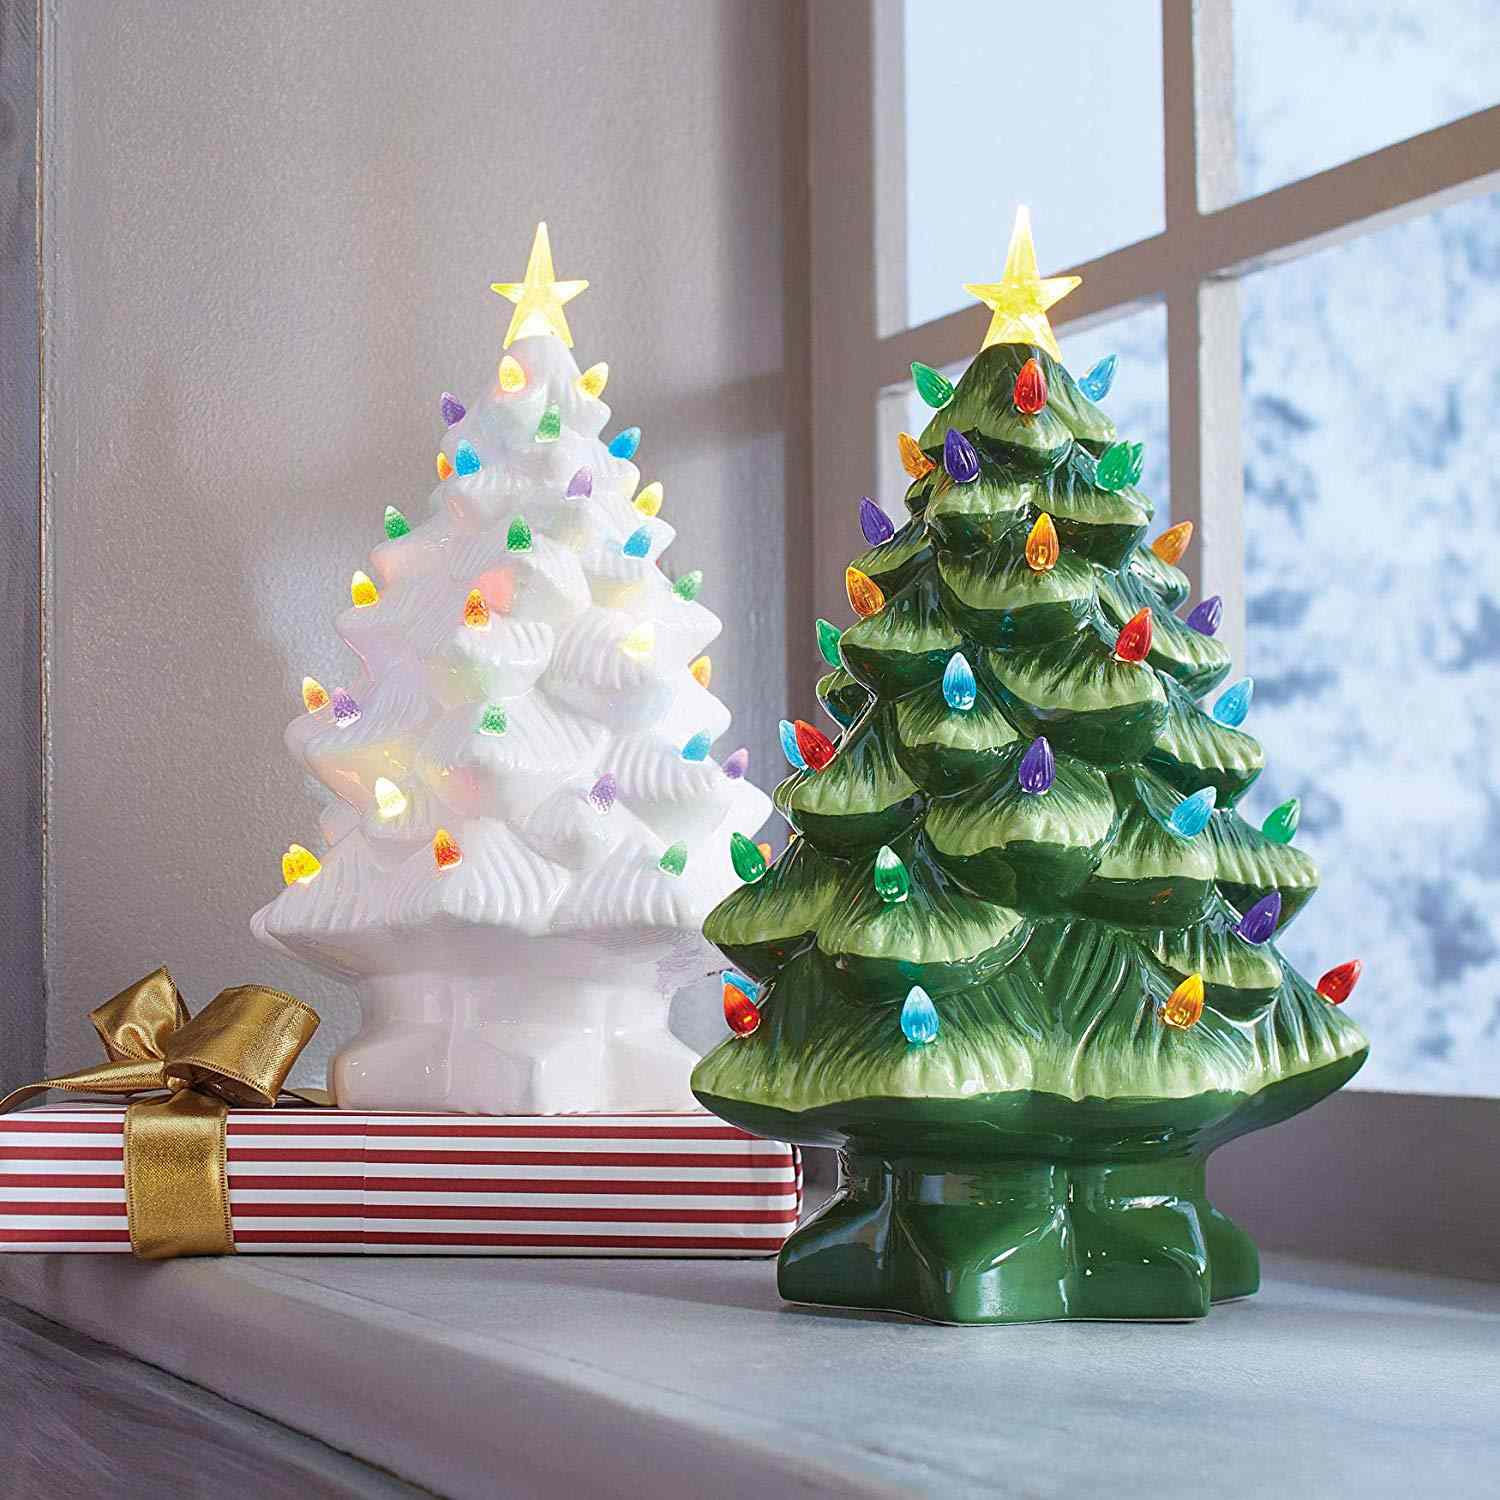 Vintage Ceramic Christmas Trees Are Back! Here's Where to Find Them